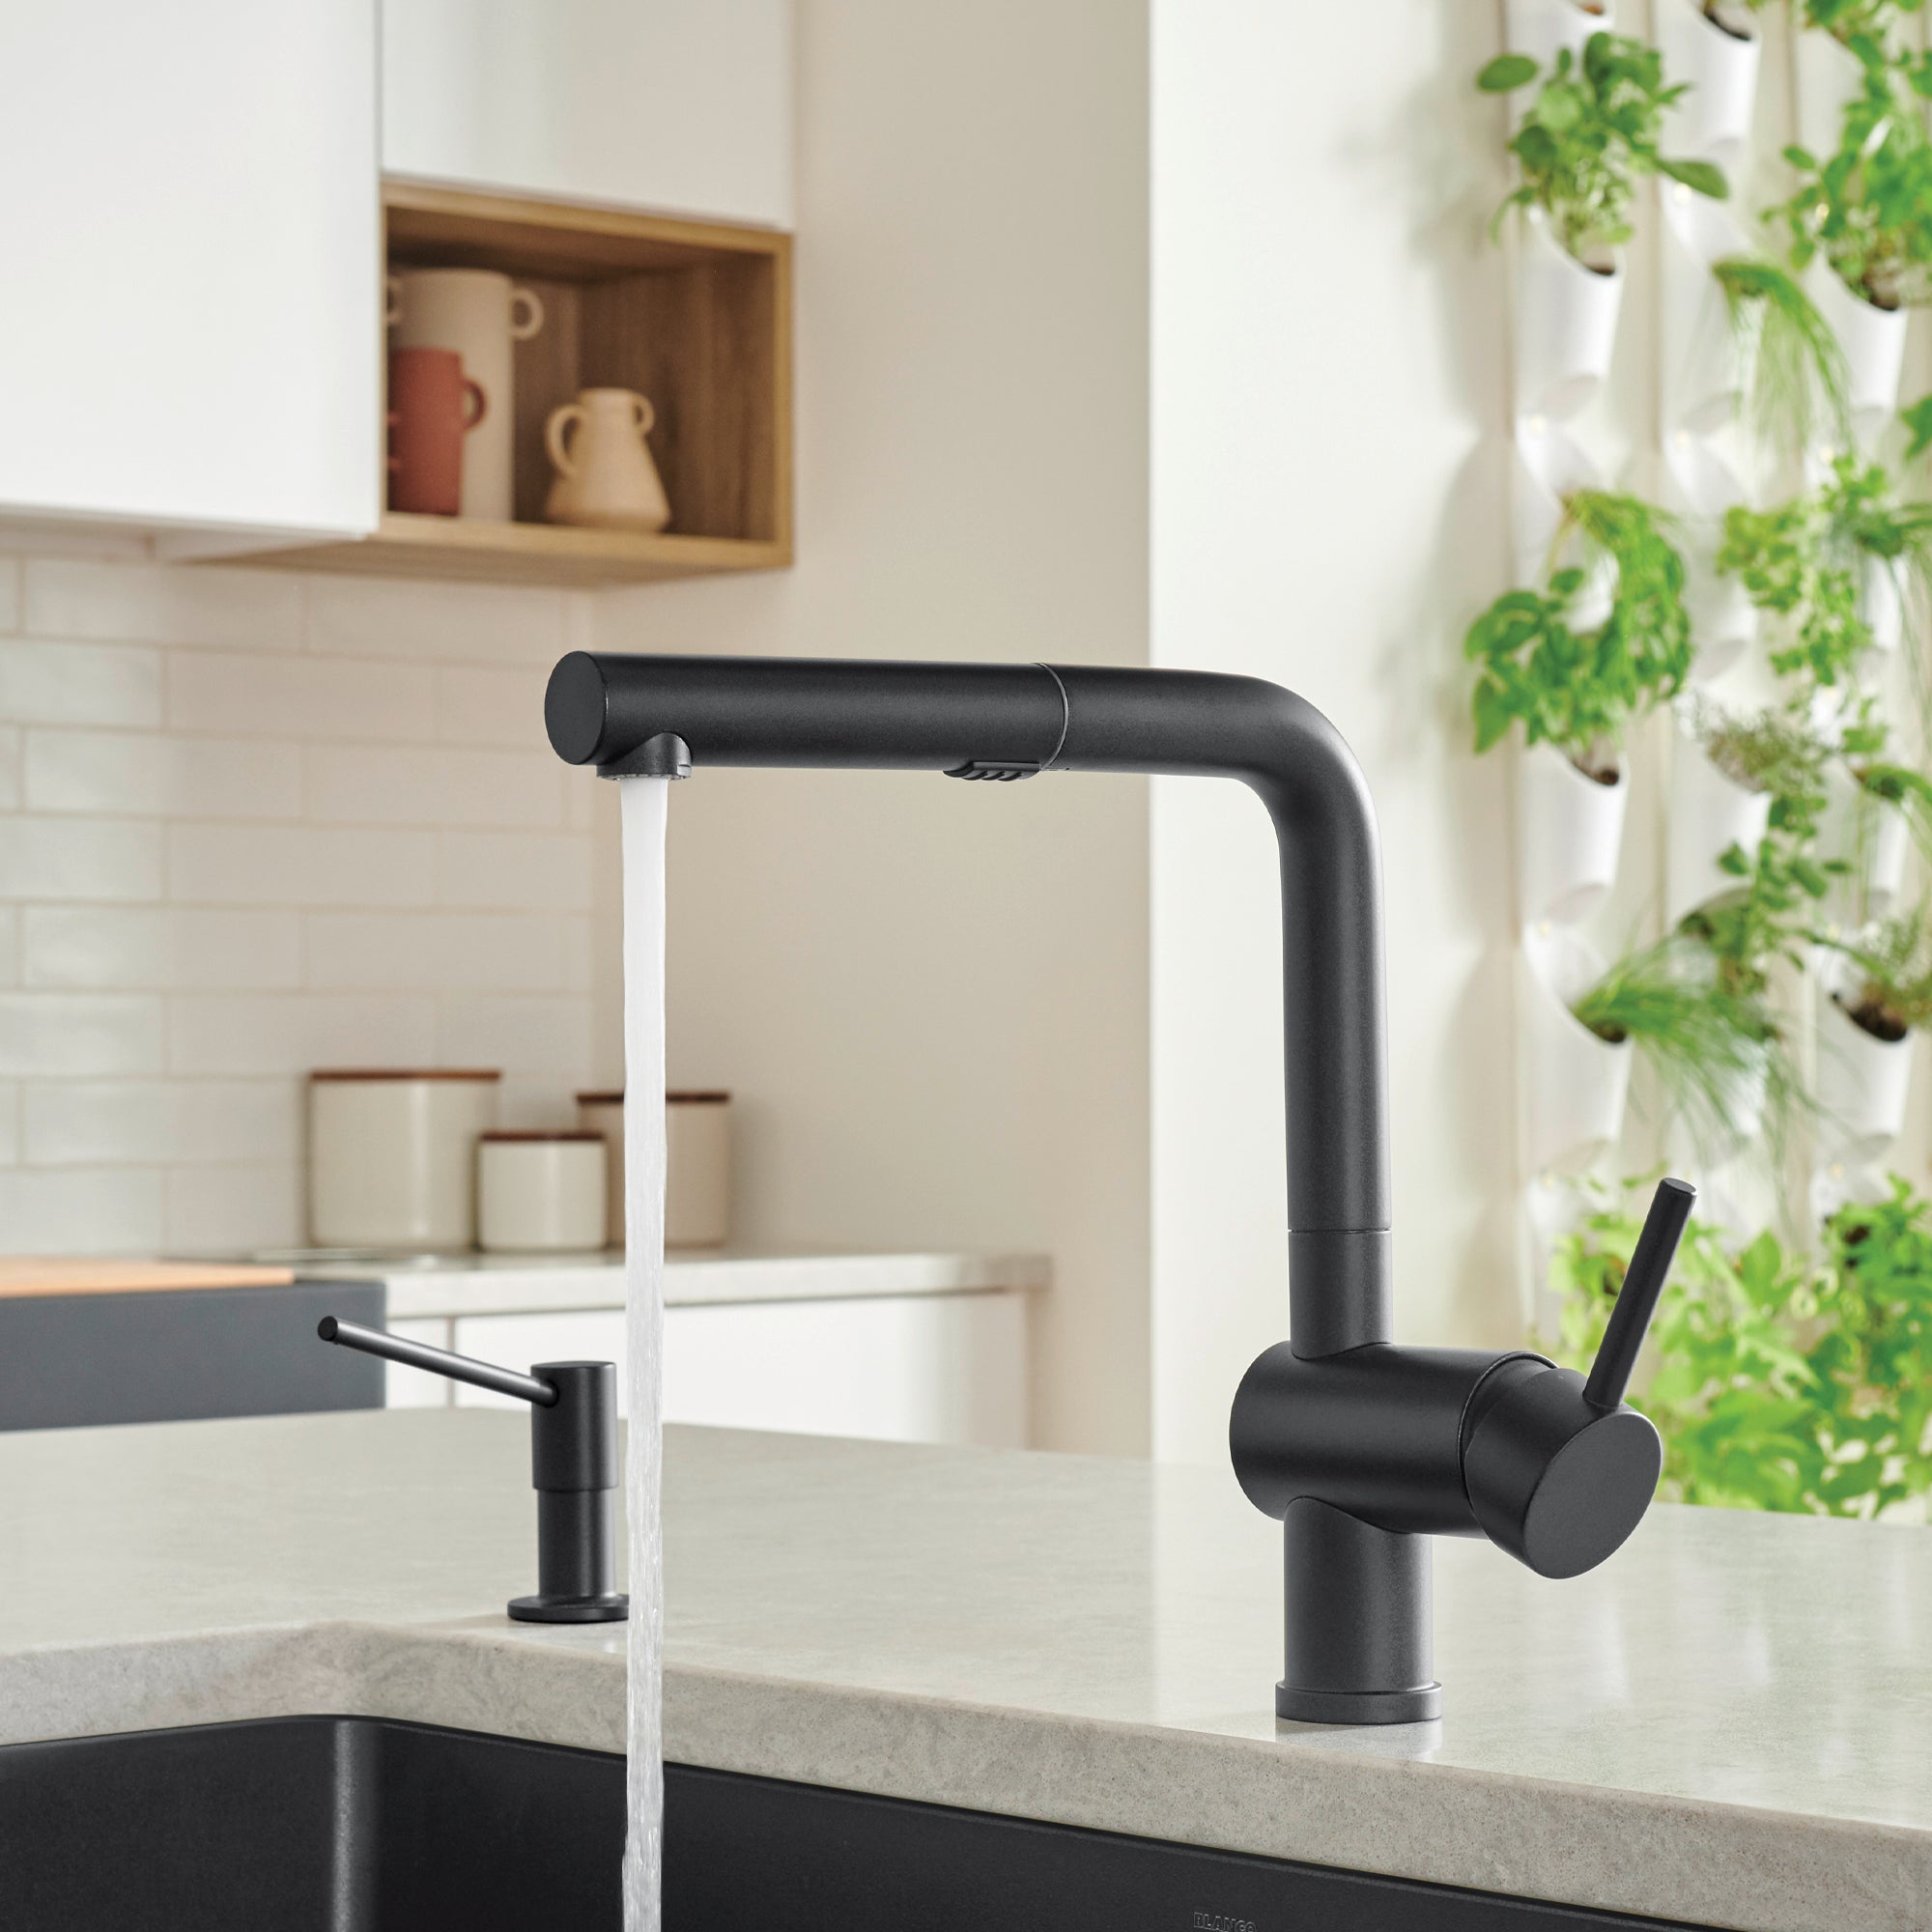 BLANCO Linus Pull-Out Kitchen Faucet in SILGRANIT Finishes